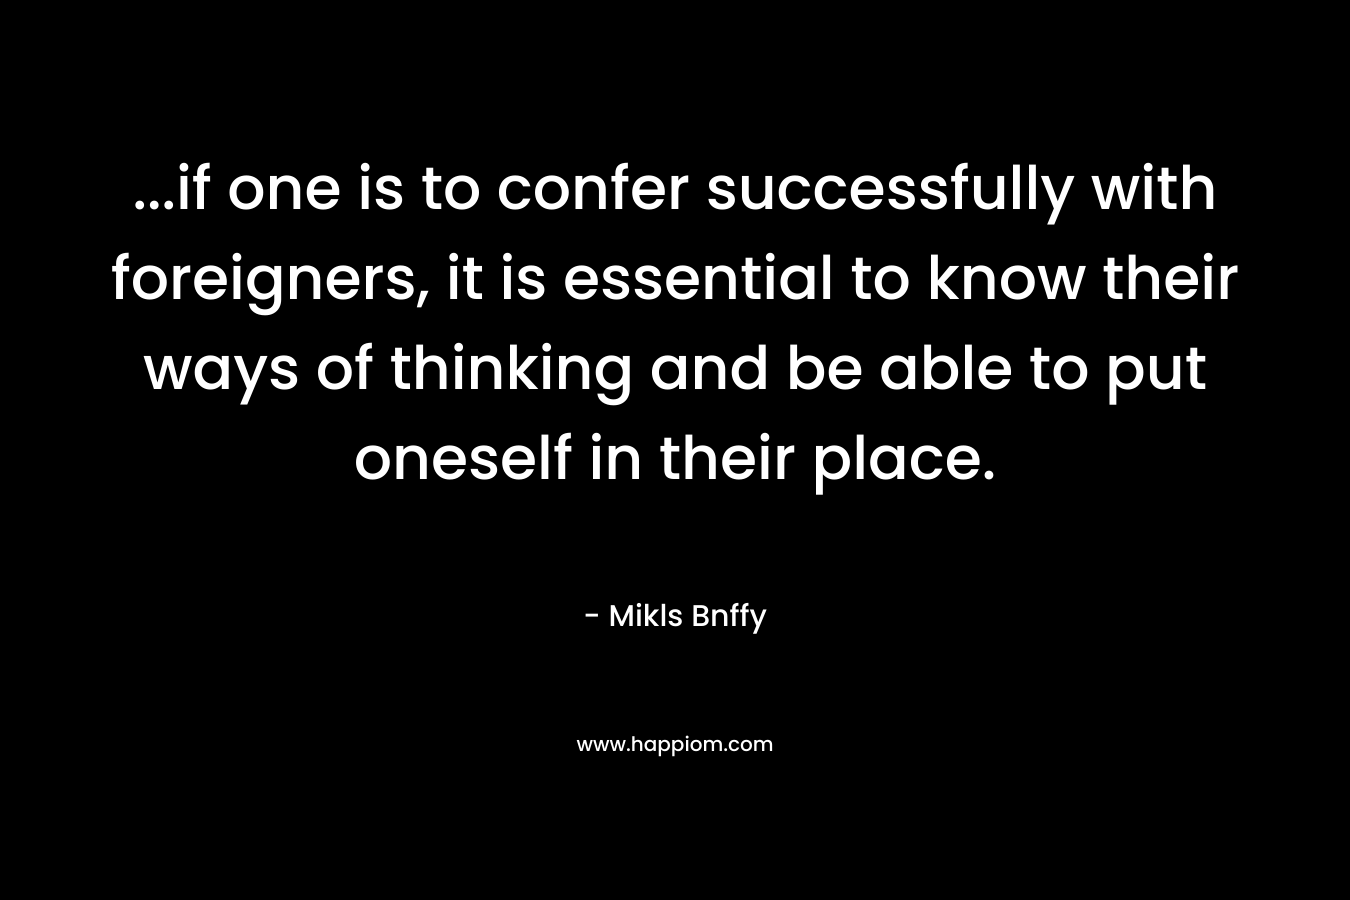 ...if one is to confer successfully with foreigners, it is essential to know their ways of thinking and be able to put oneself in their place.